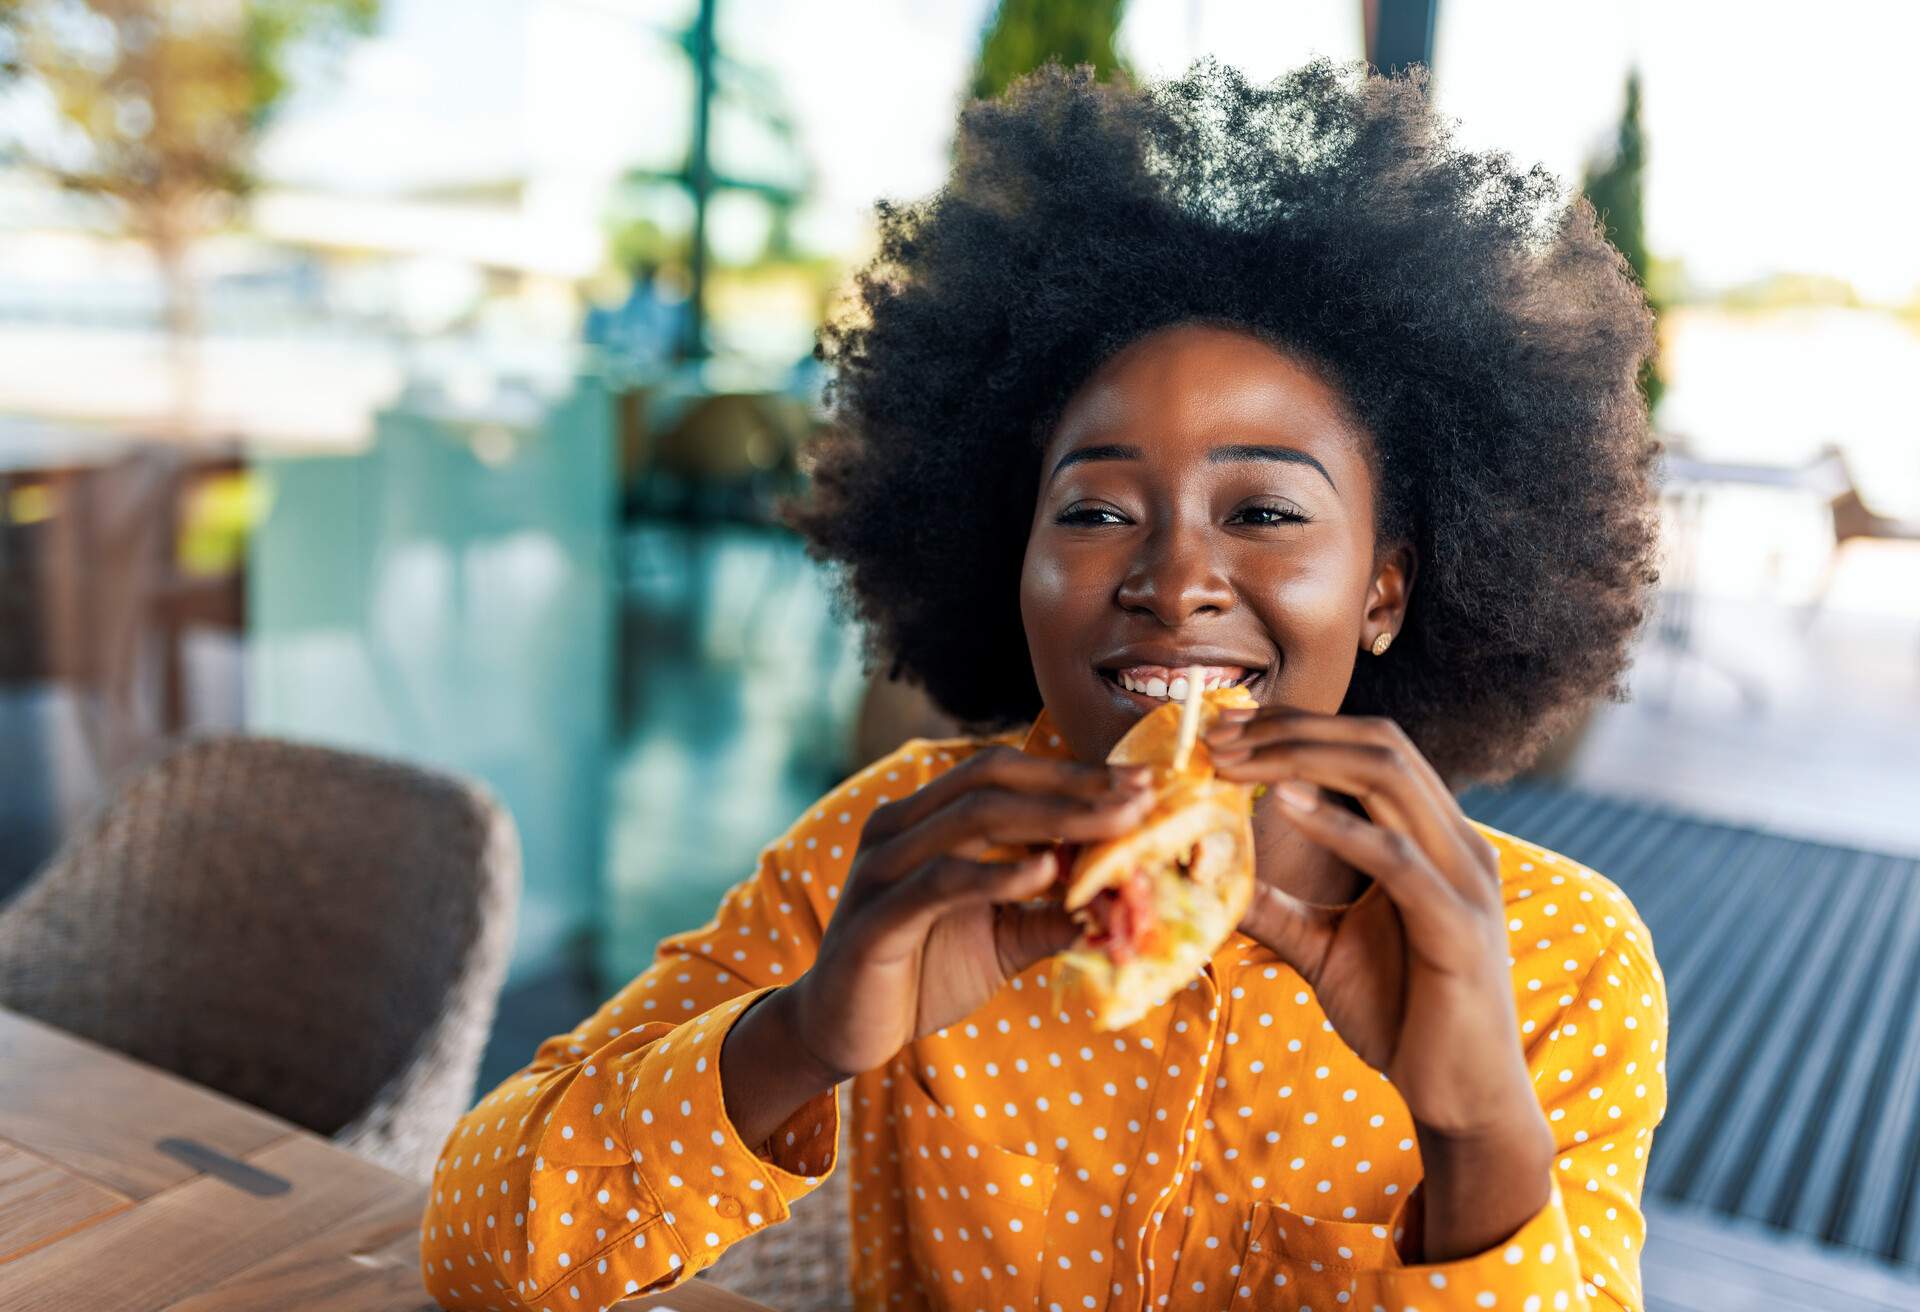 Girl bites off veggie sandwich. Copy space. Blurred background. Photo of young African woman eating sandwich at cafe.